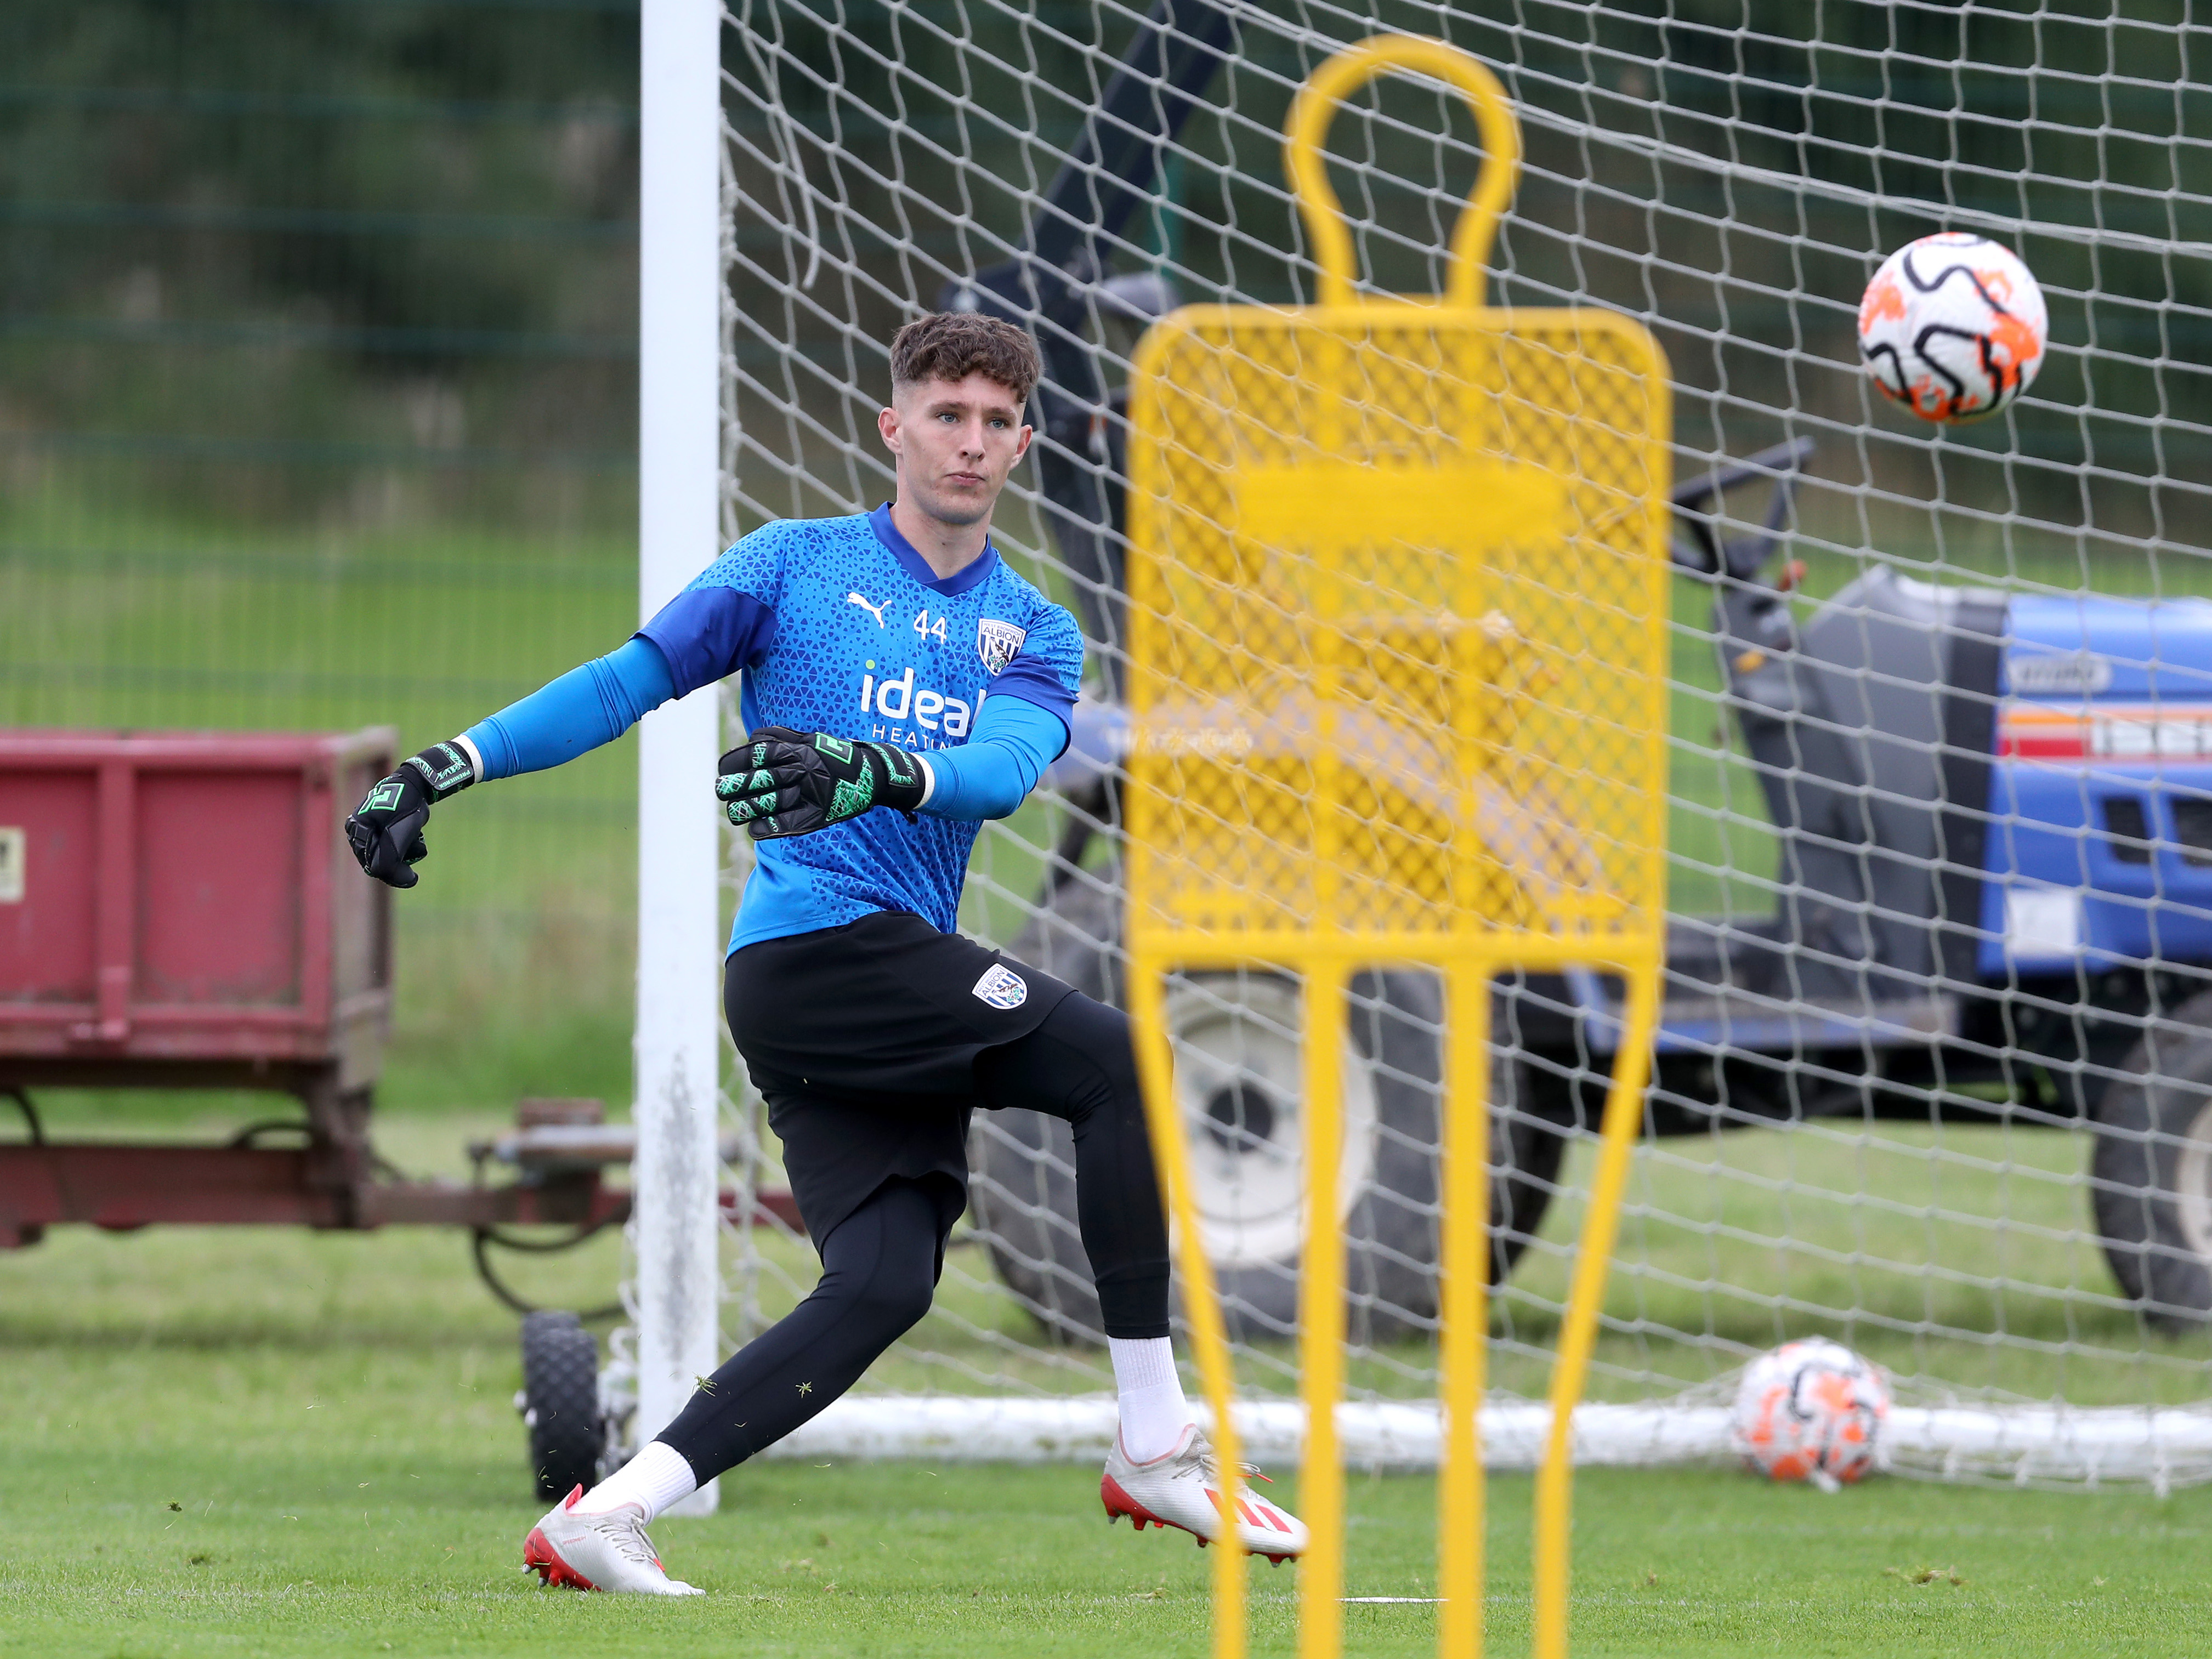 A photo of Albion PL2 goalkeeper Ronnie Hollingshead kicking a ball in training